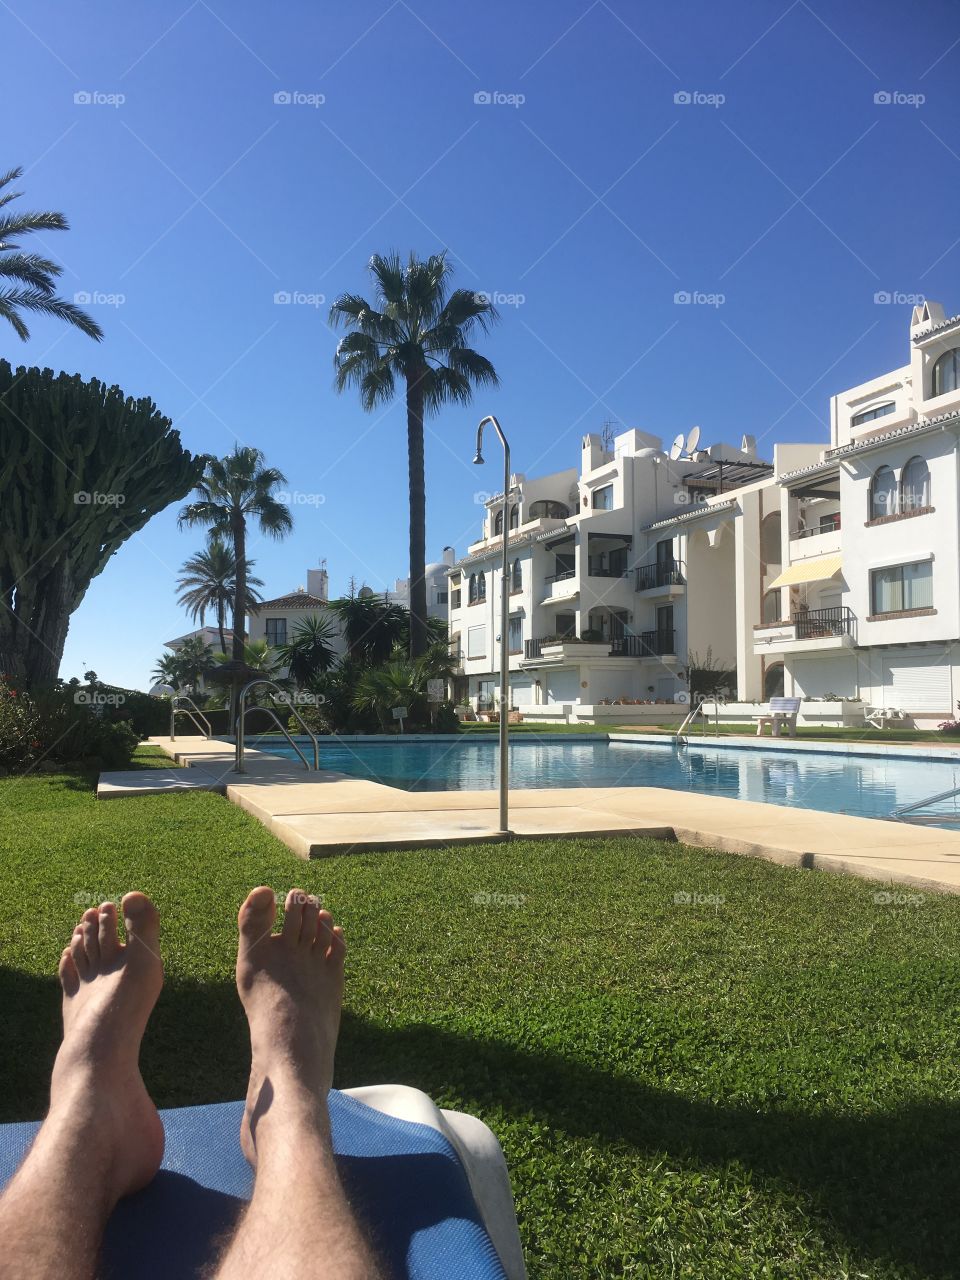 ‘2 feet from the pool...’ Time to relax. The crisp blue sky. The palm trees. The pool. This is Spain. 